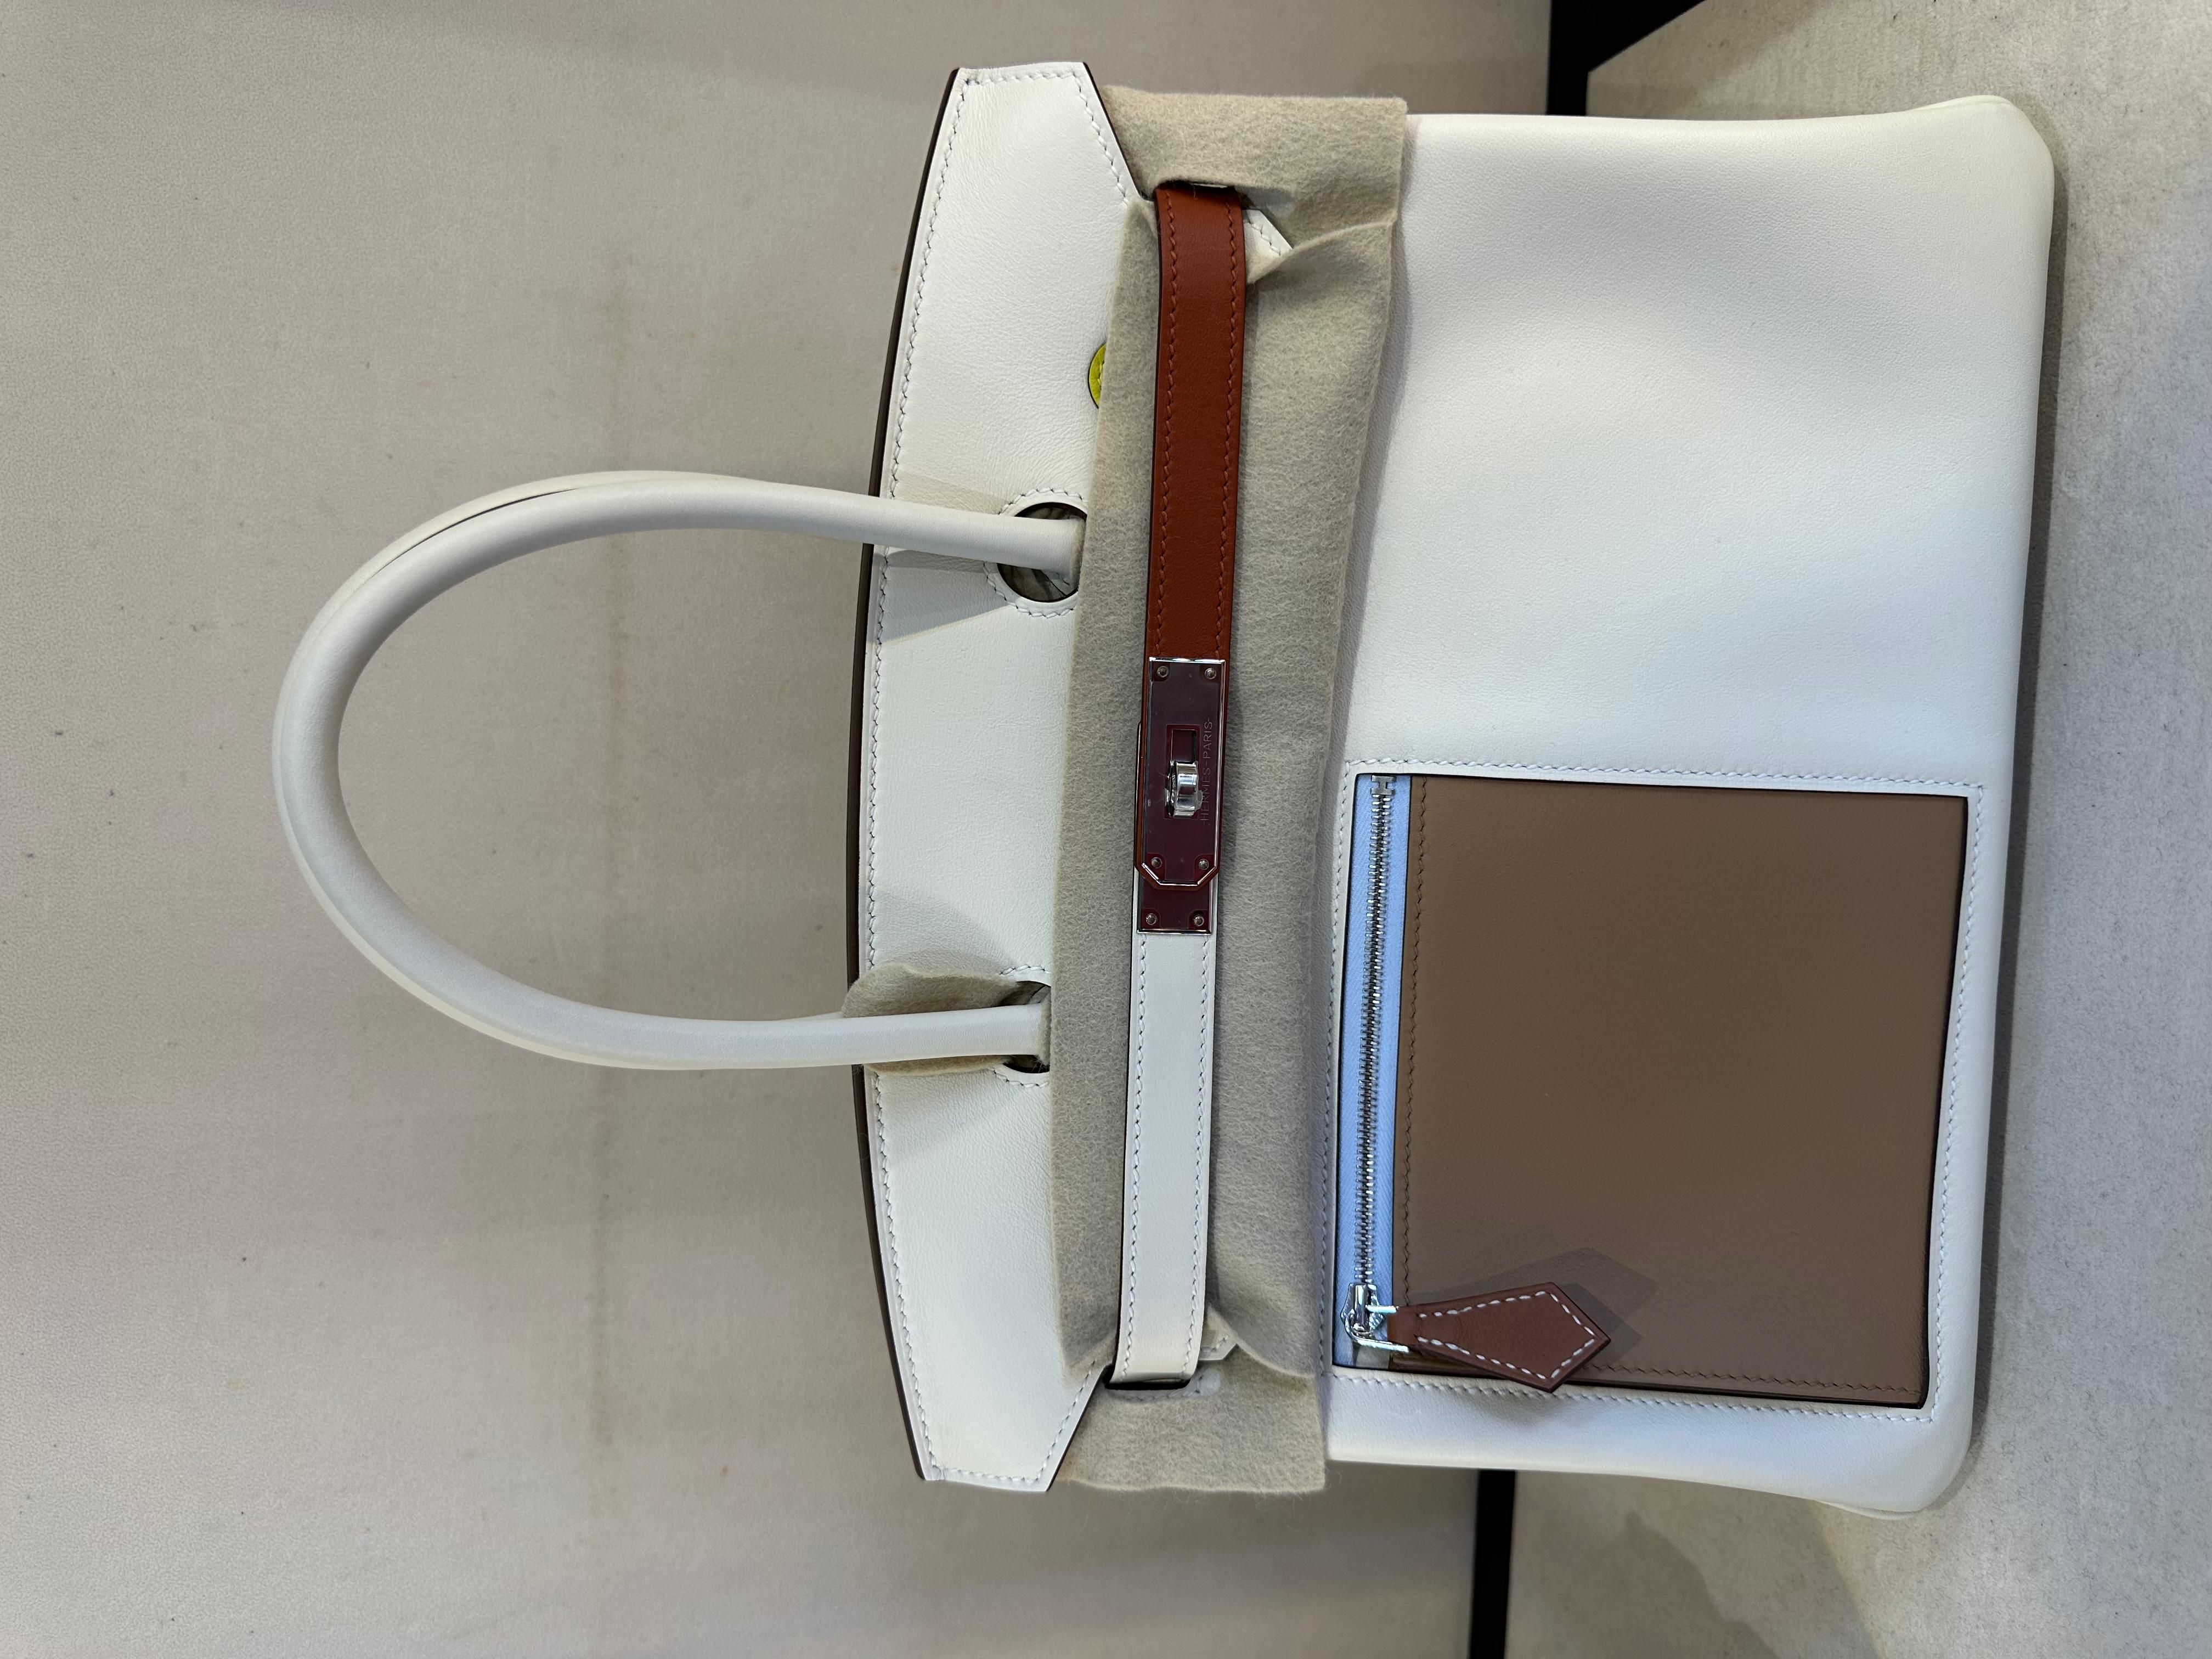 Hermès Colormatic Birkin 30 Nata, Chai and Cuivre Swift palladium Hardware. 

This limited edition Colormatic Birkin is in Nata, Chai and Cuivre swift leather with palladium hardware and has tonal stitching, front flap, two straps with center toggle